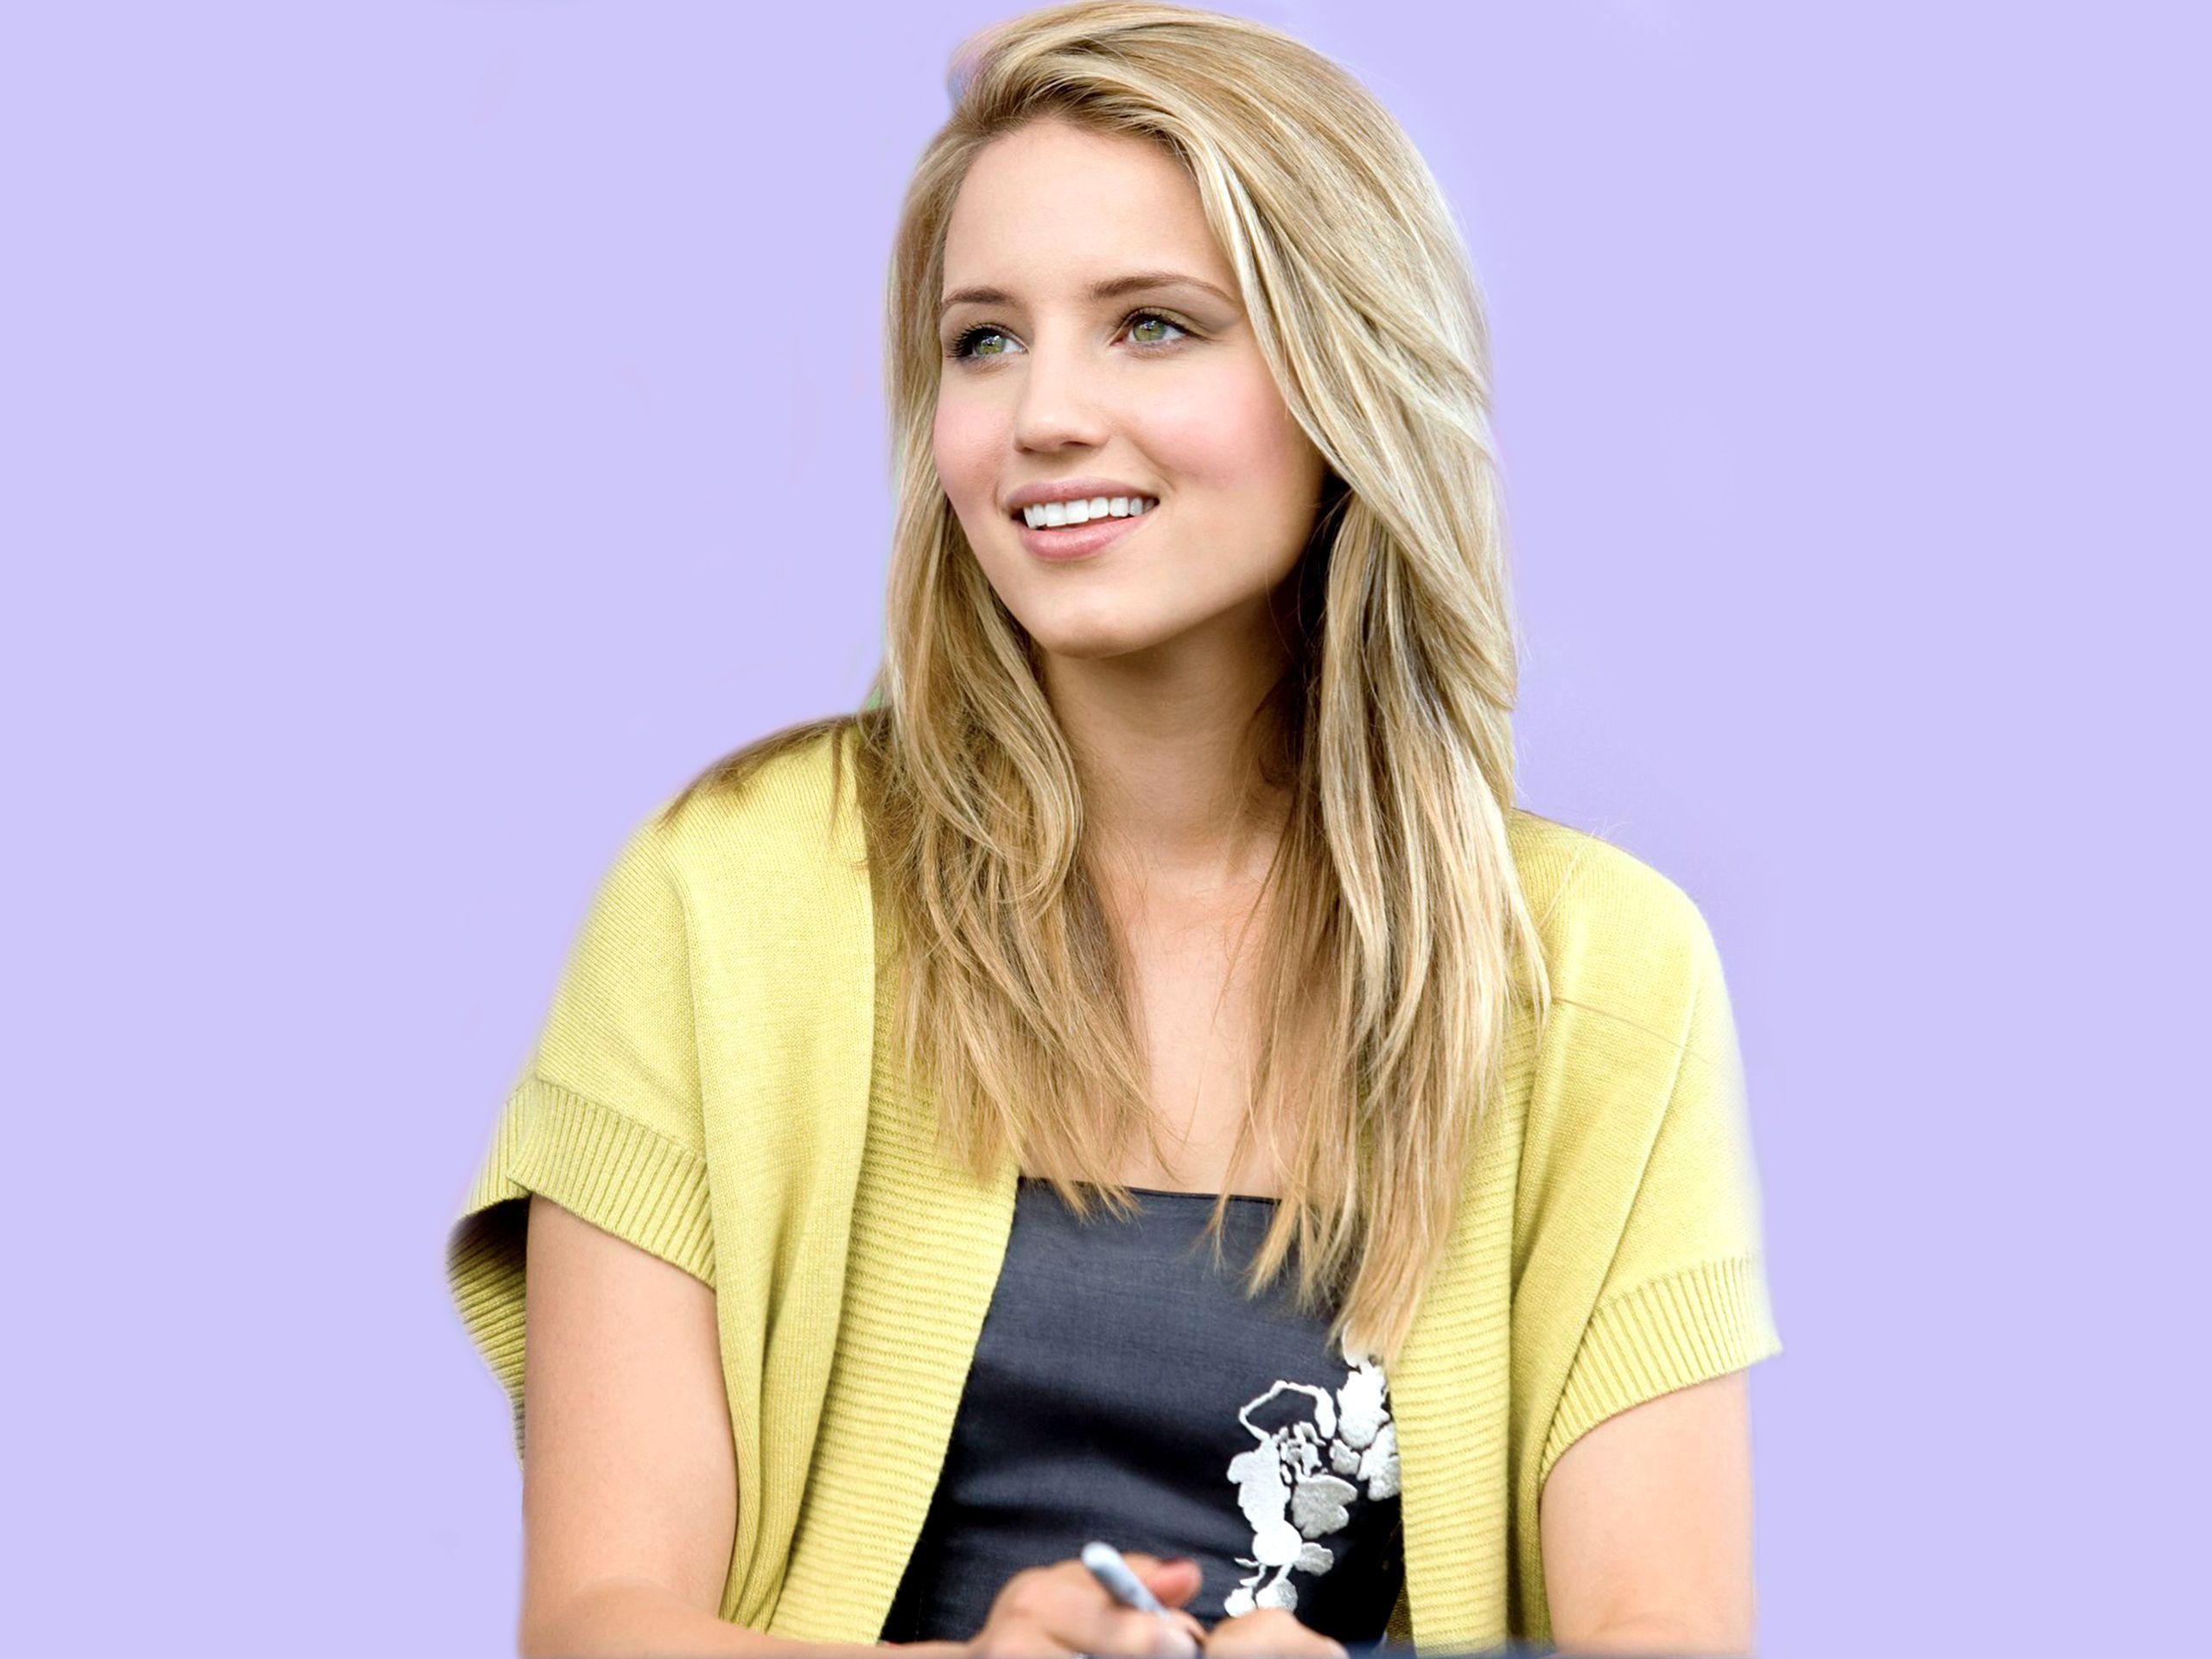 Dianna Agron Wallpaper High Resolution and Quality Download